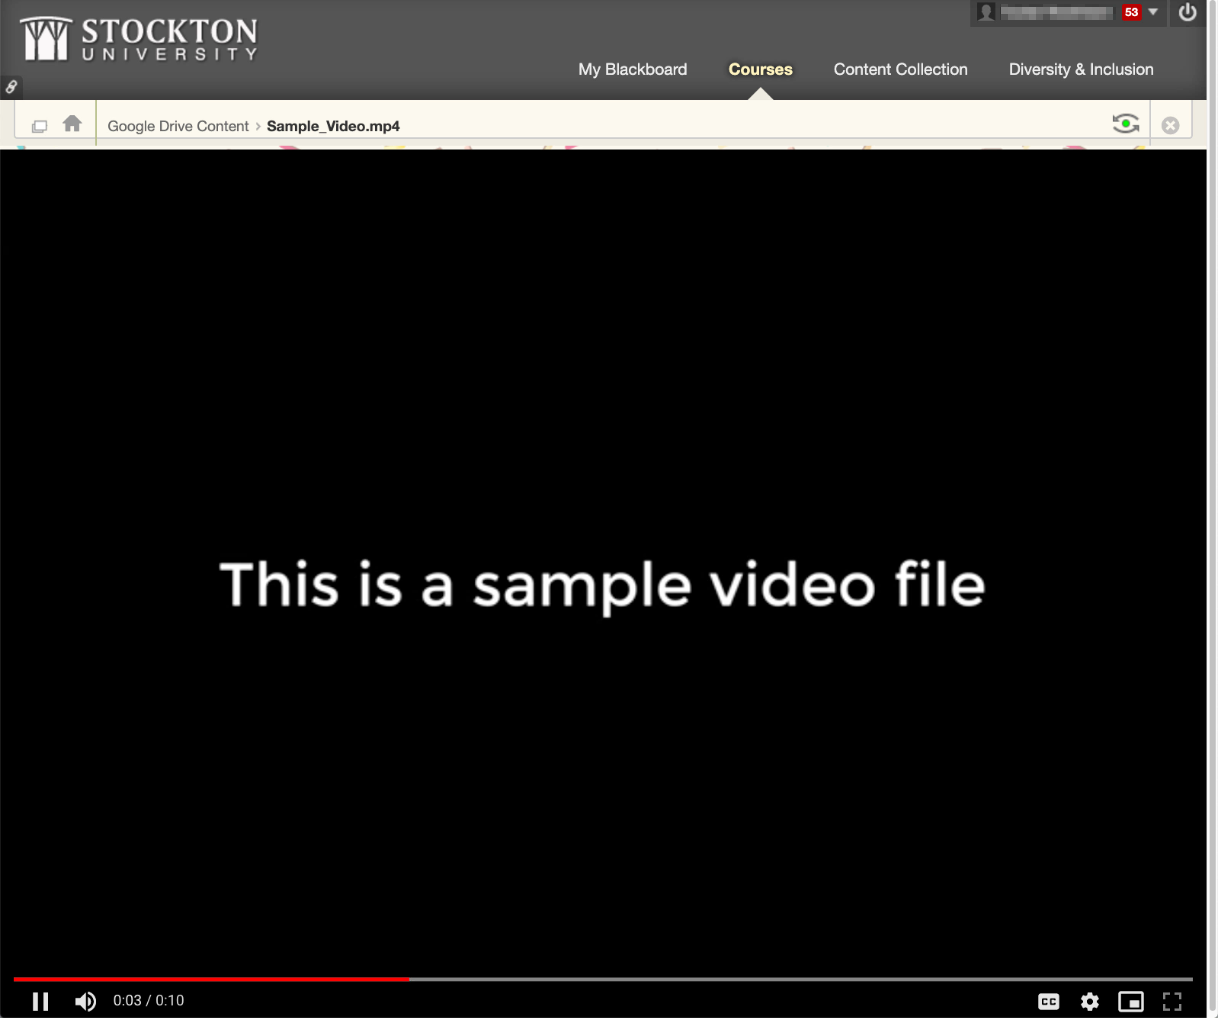 A screenshot of an embedded video file playing within Blackboard.